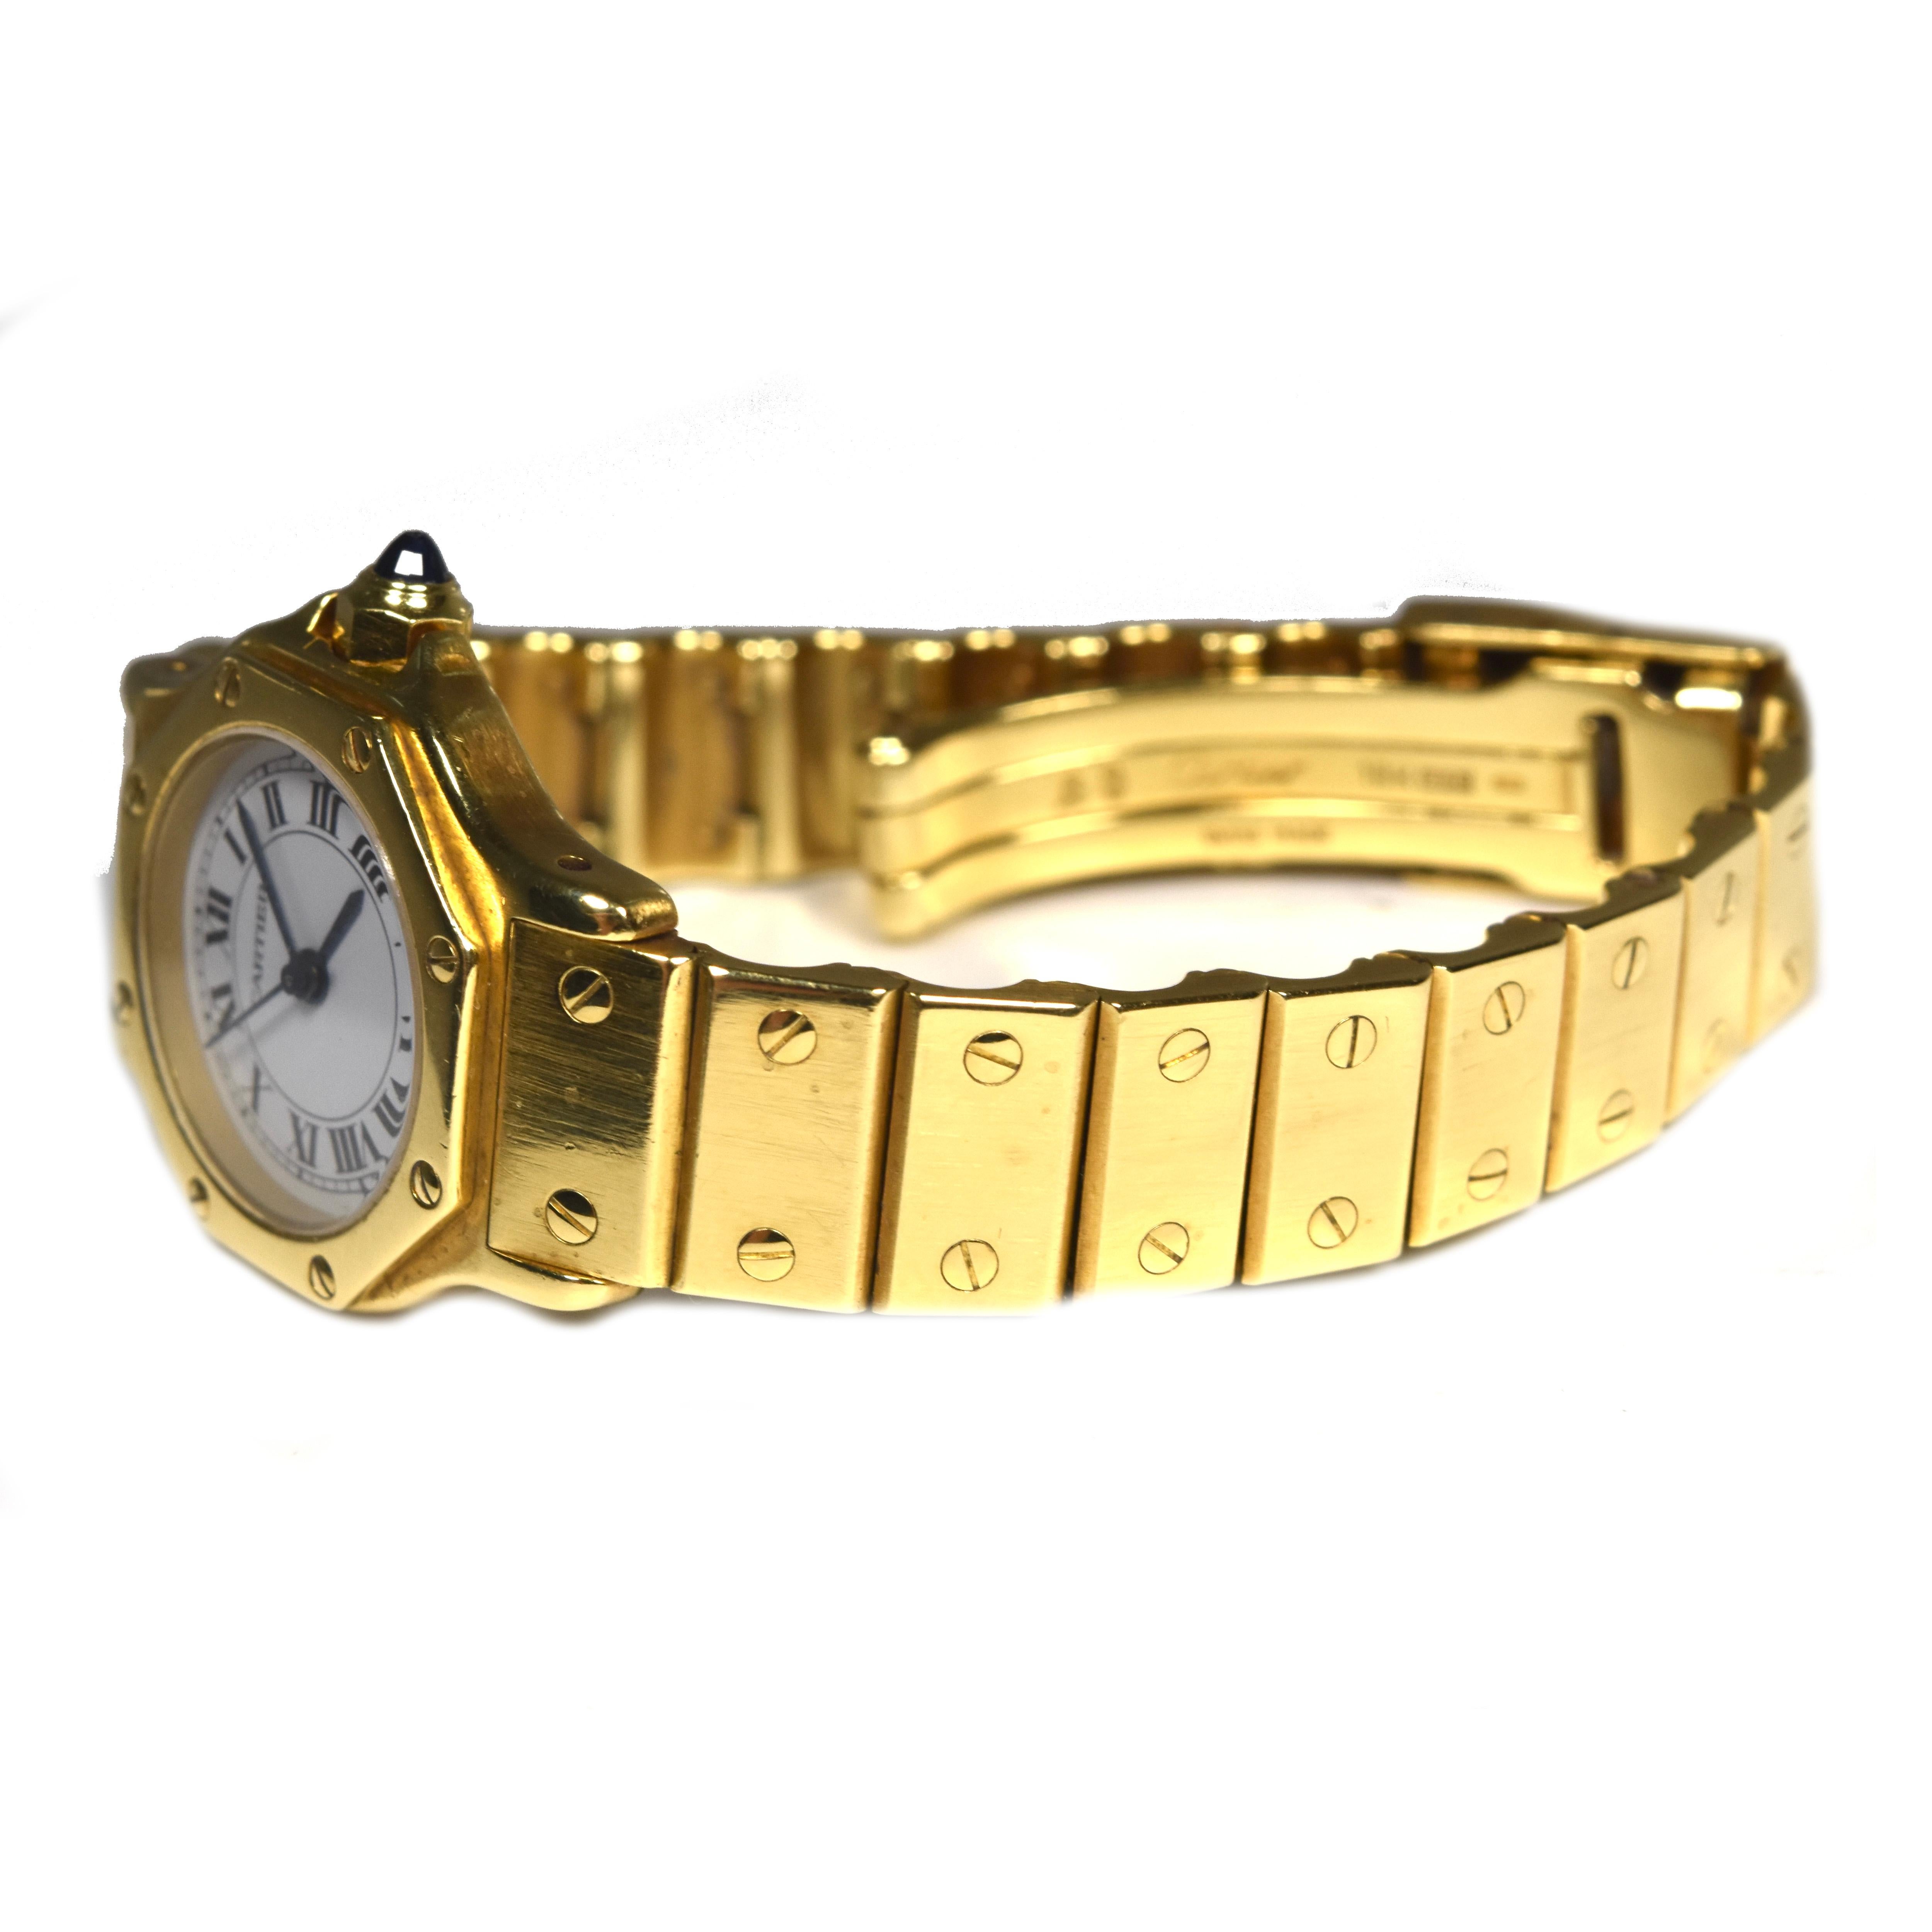 Brand: Cartier

Collection: Santos

Metal : 18k Yellow Gold 

Case Size: 29.5 mm

Stone :  Sapphire cabochon 

Dial : White Dial with Roman Numeral Index 

Hands : Roman Numeral Index​​​​​​​

​​​Includes: Brilliance Jewels 2 Year Warranty

         